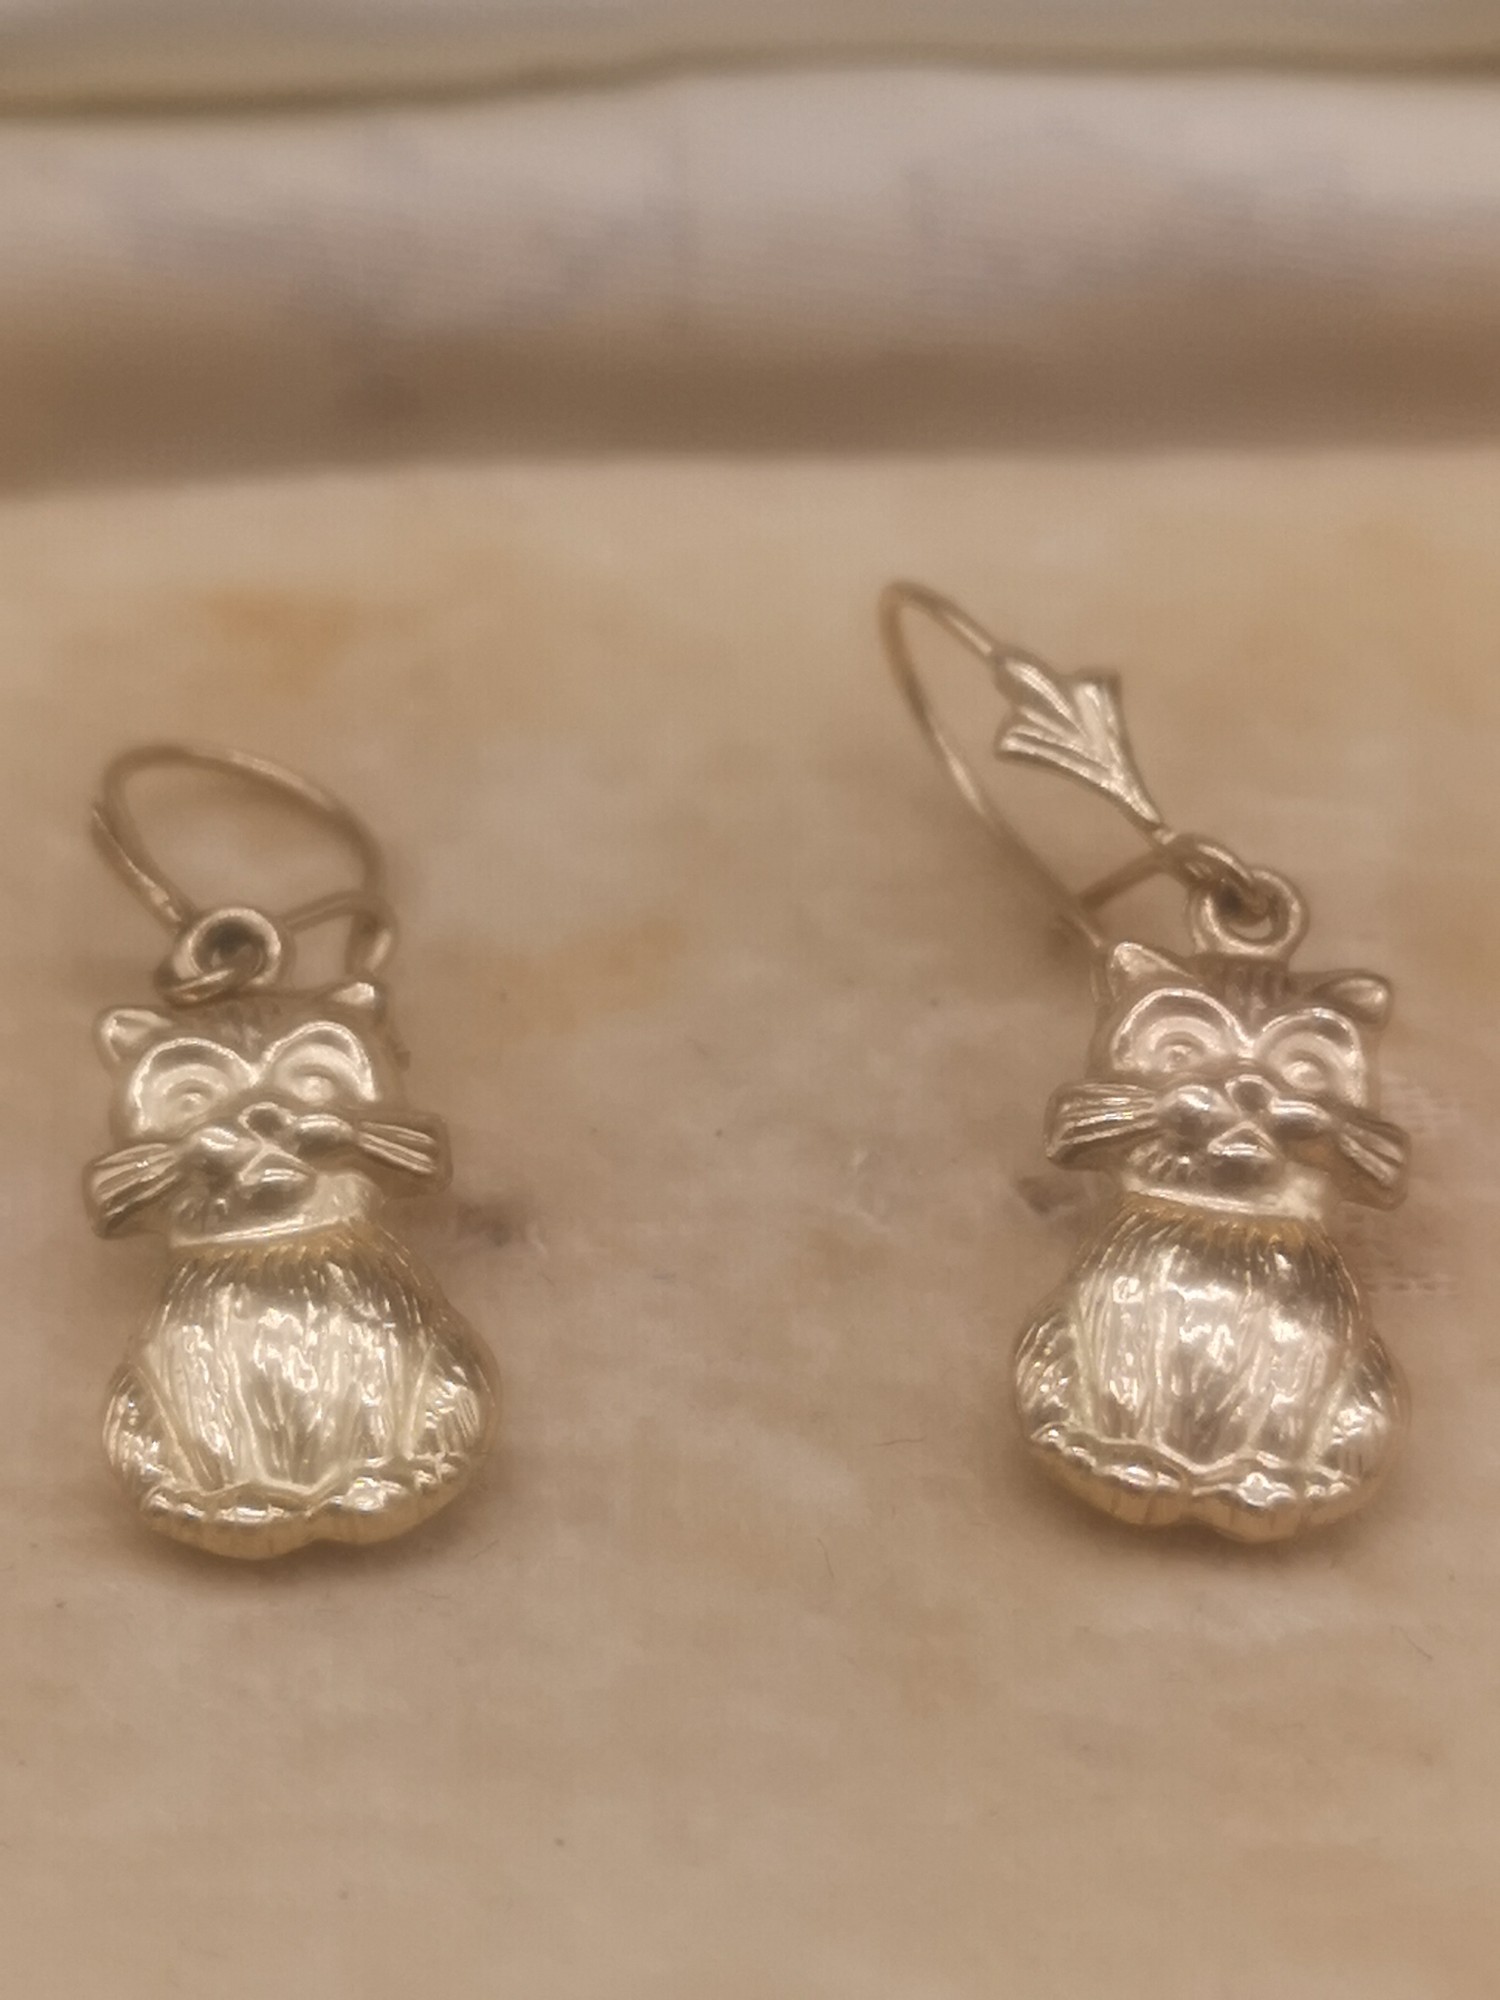 Pair of 9ct gold cat earrings. - Image 2 of 2